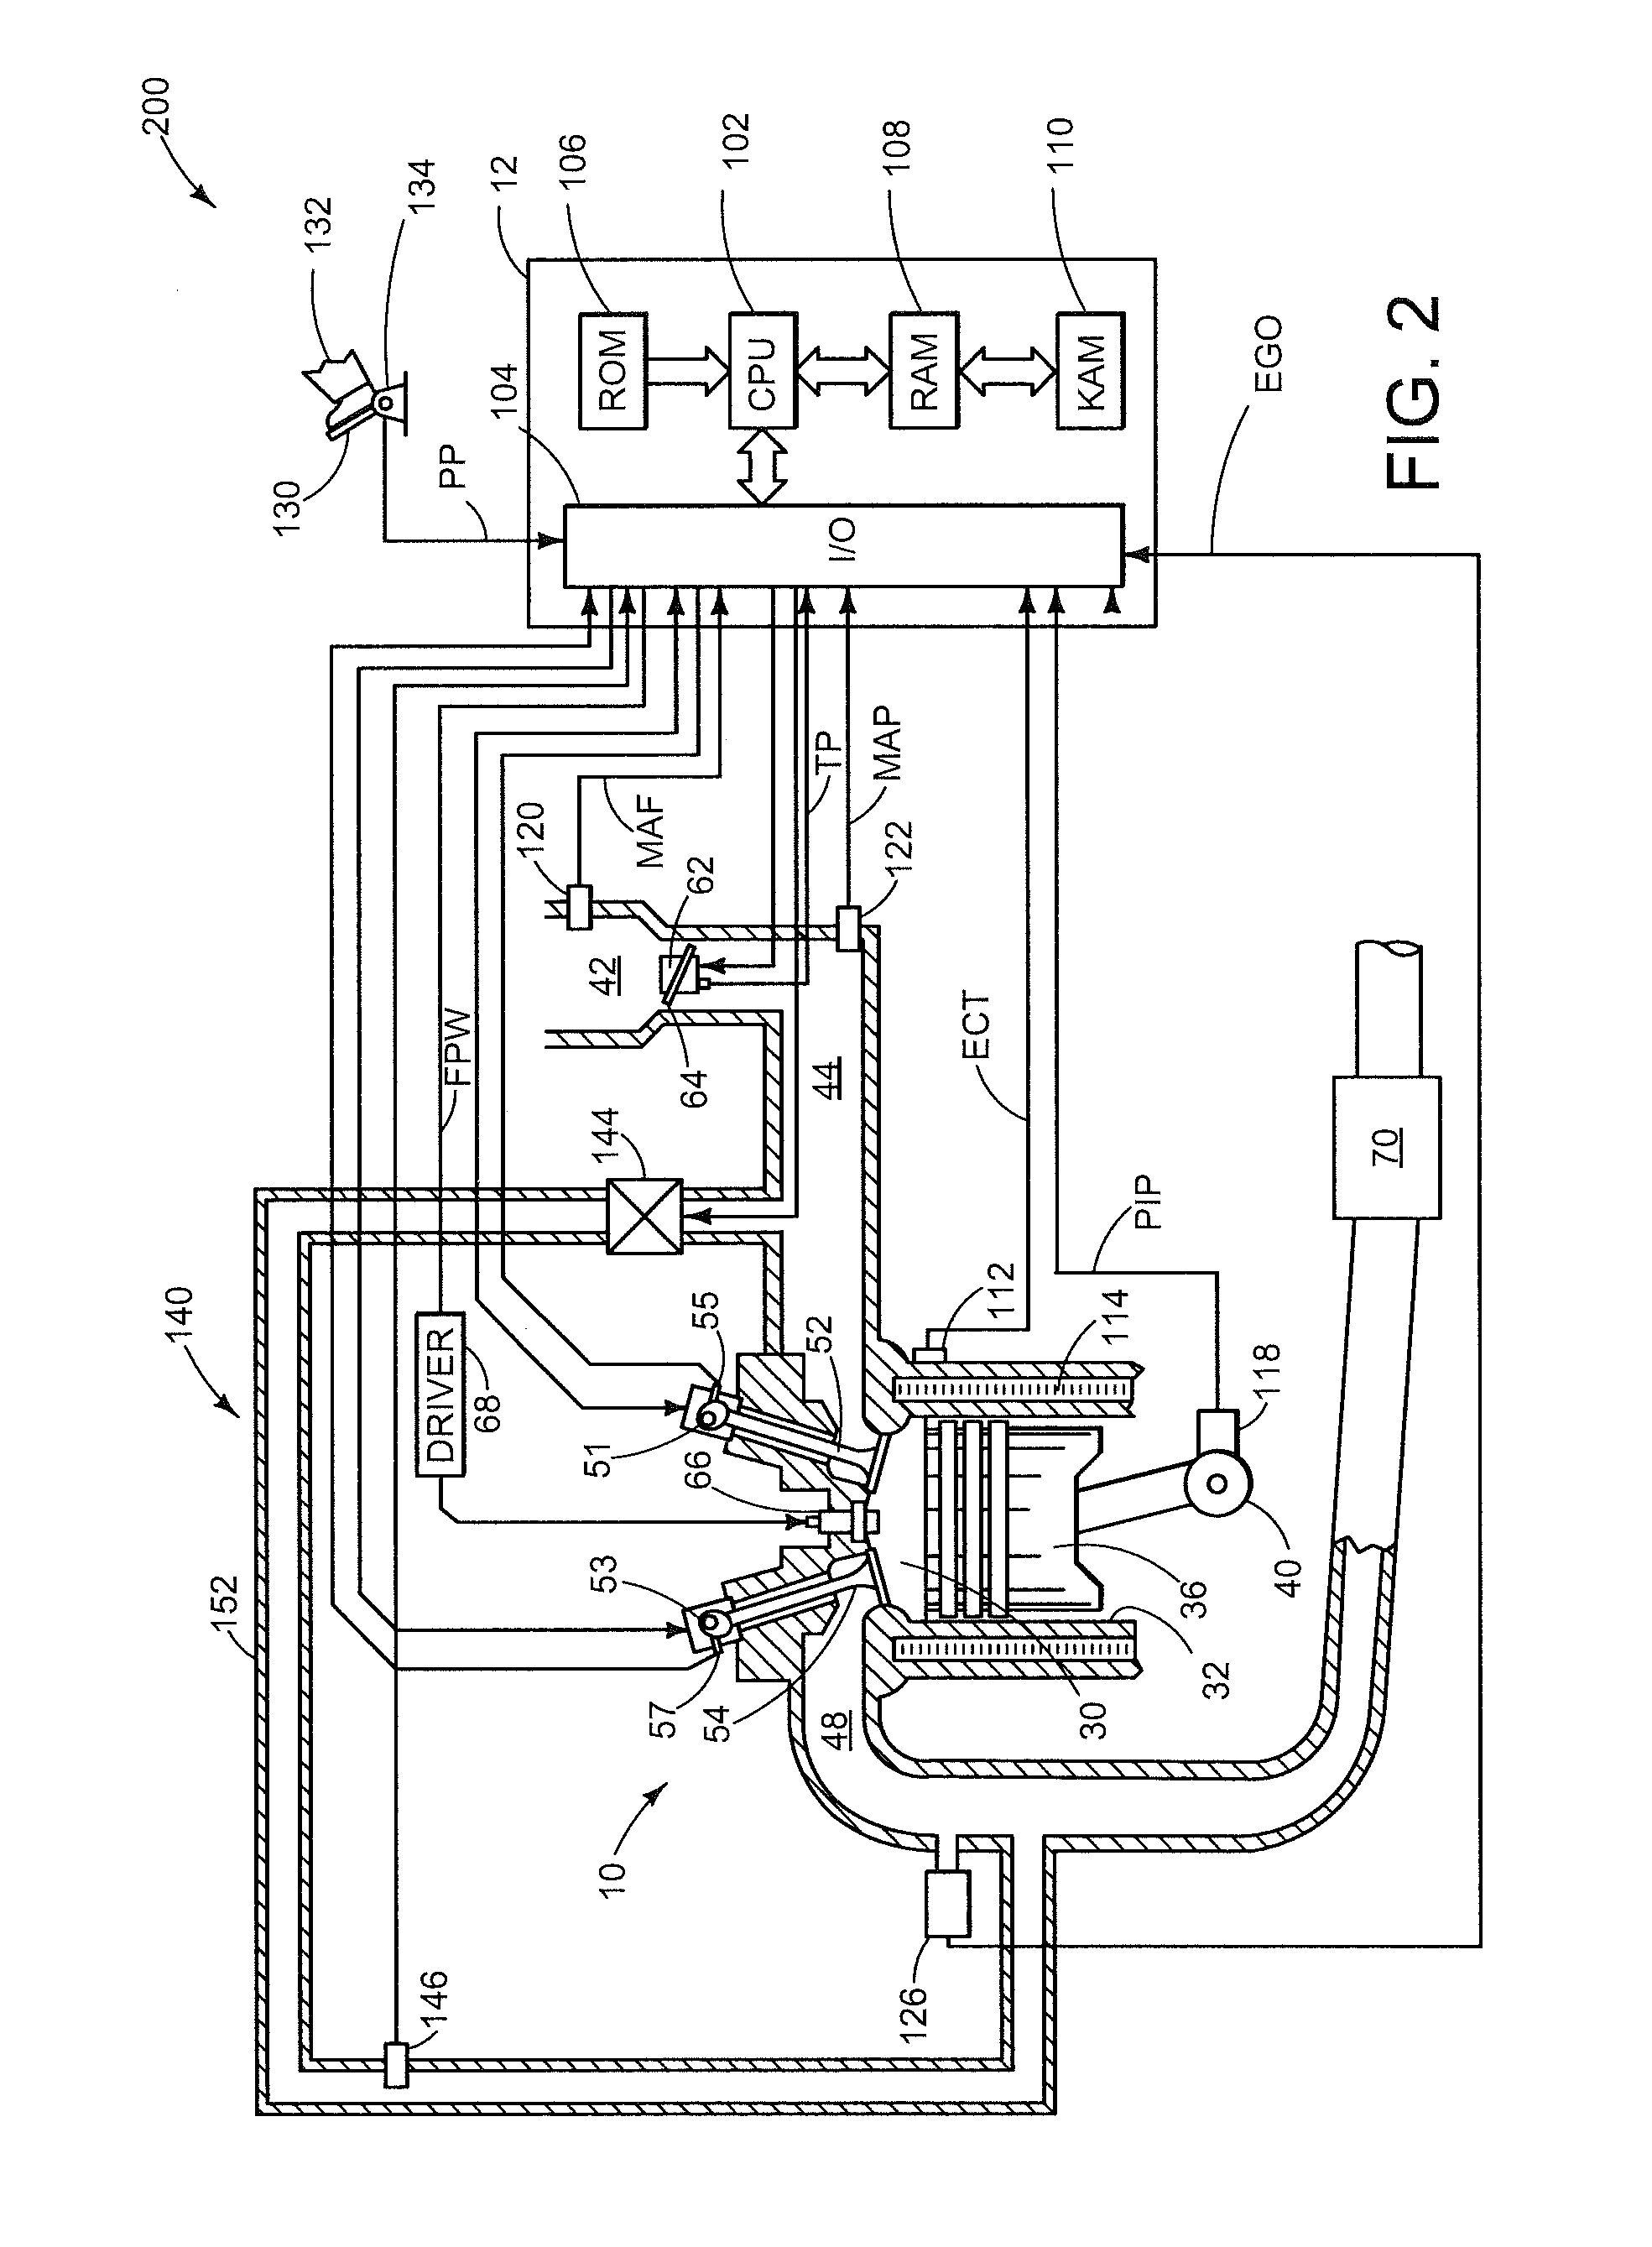 Methods and systems for humidity detection via an exhaust gas sensor